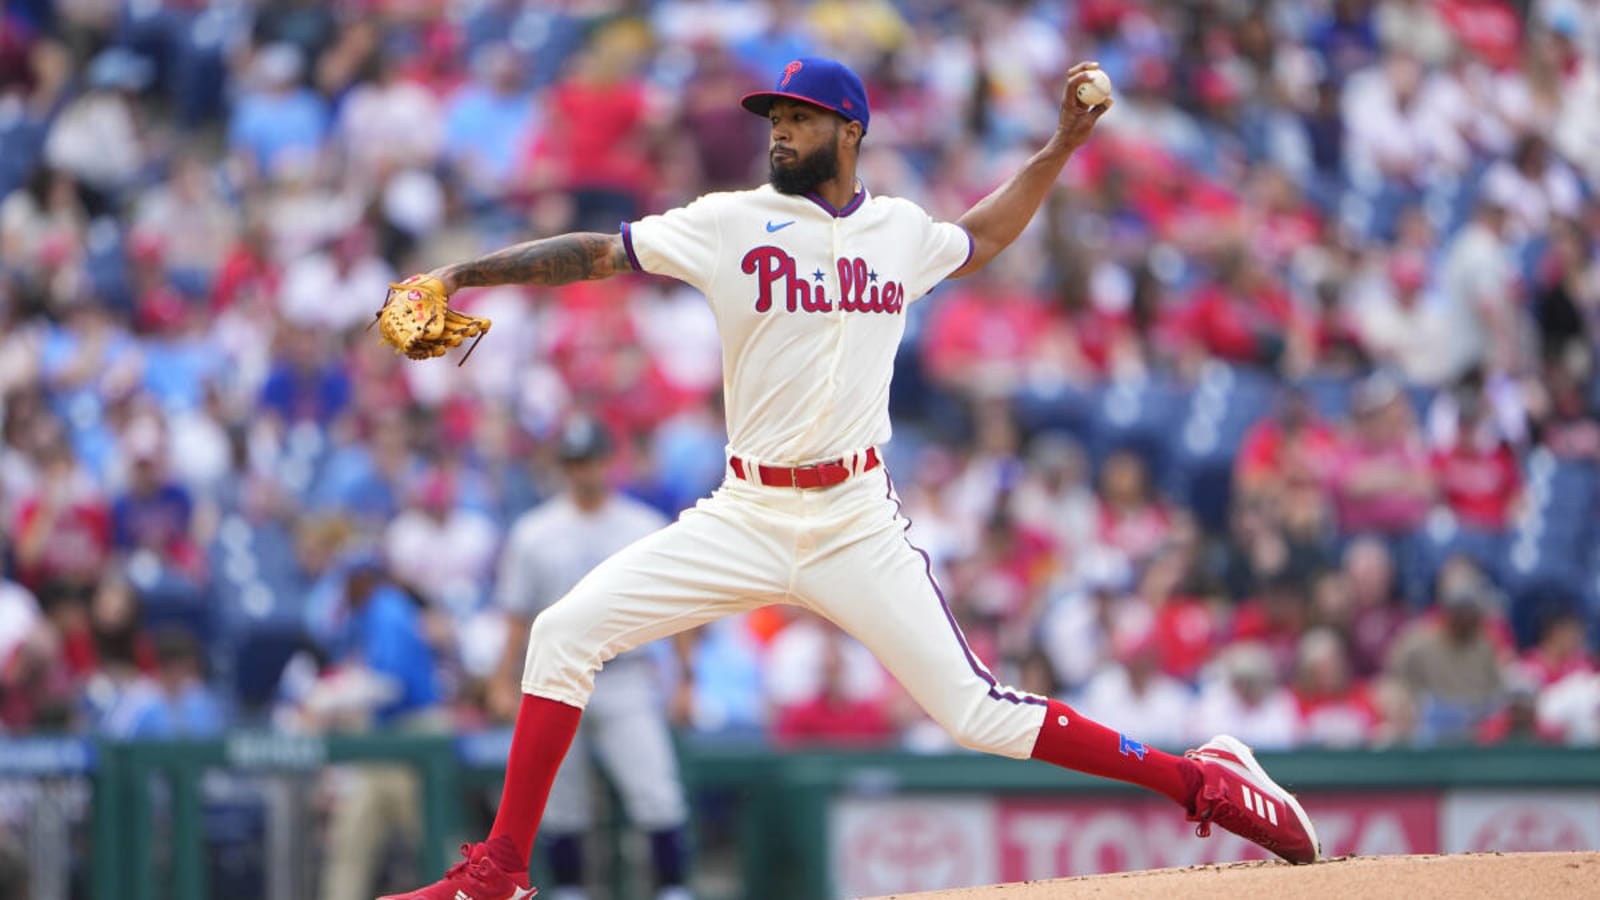 Scouts See Intriguing Trend In Phillies Starter